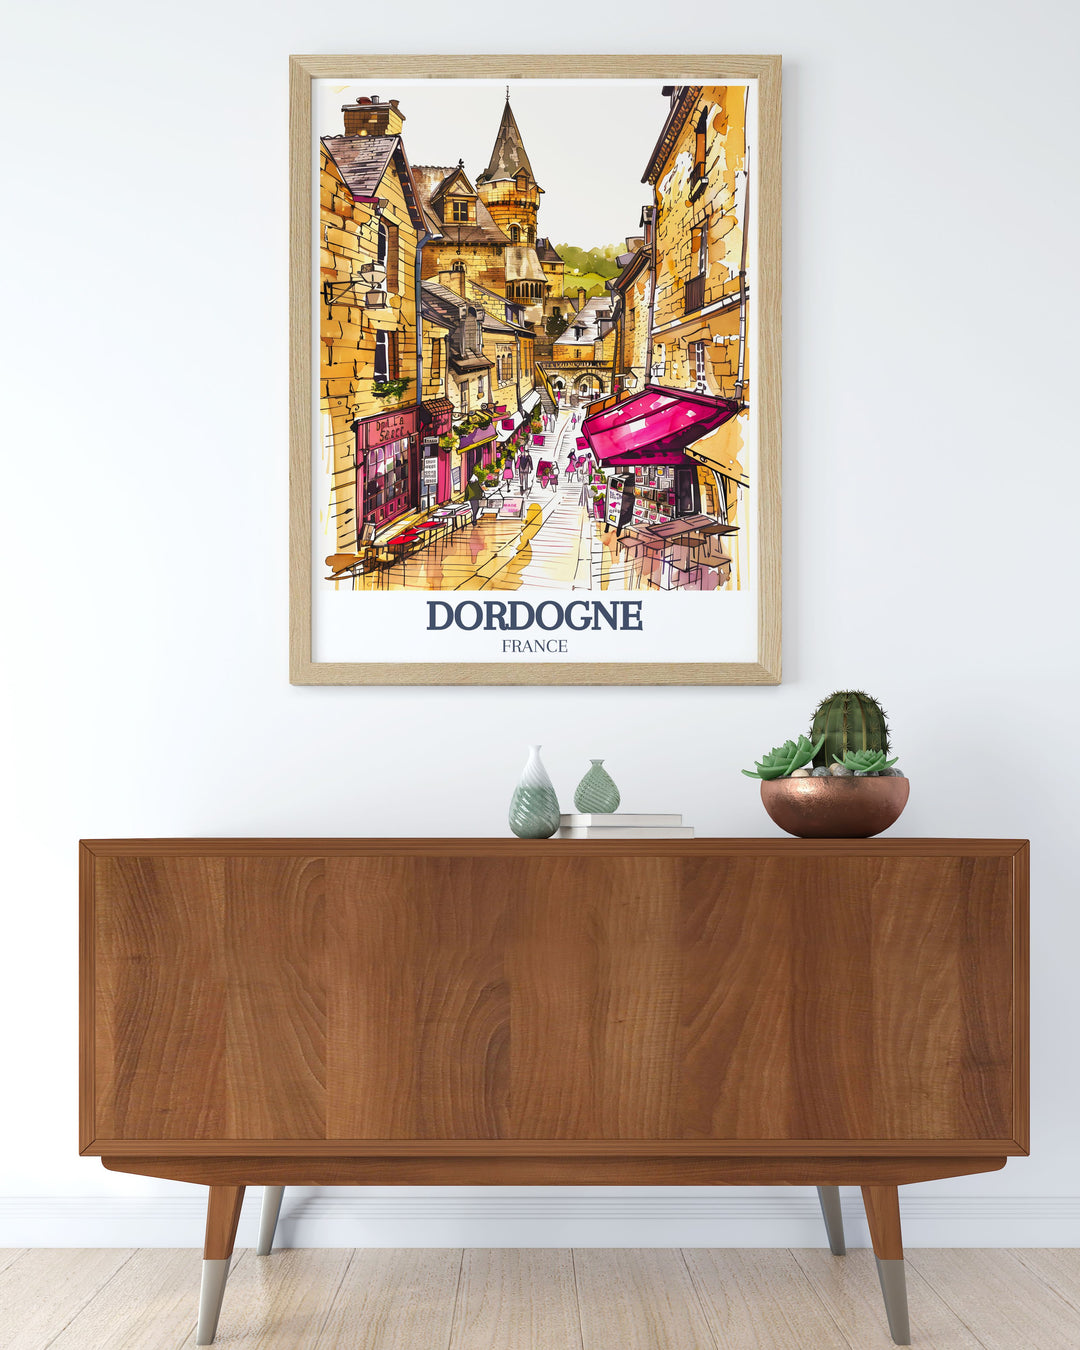 Stunning Sarlat la Caneda, Cathedral of Saint Sacerdos at Sarlat travel print showcasing the Gothic beauty and historical significance of this iconic French landmark